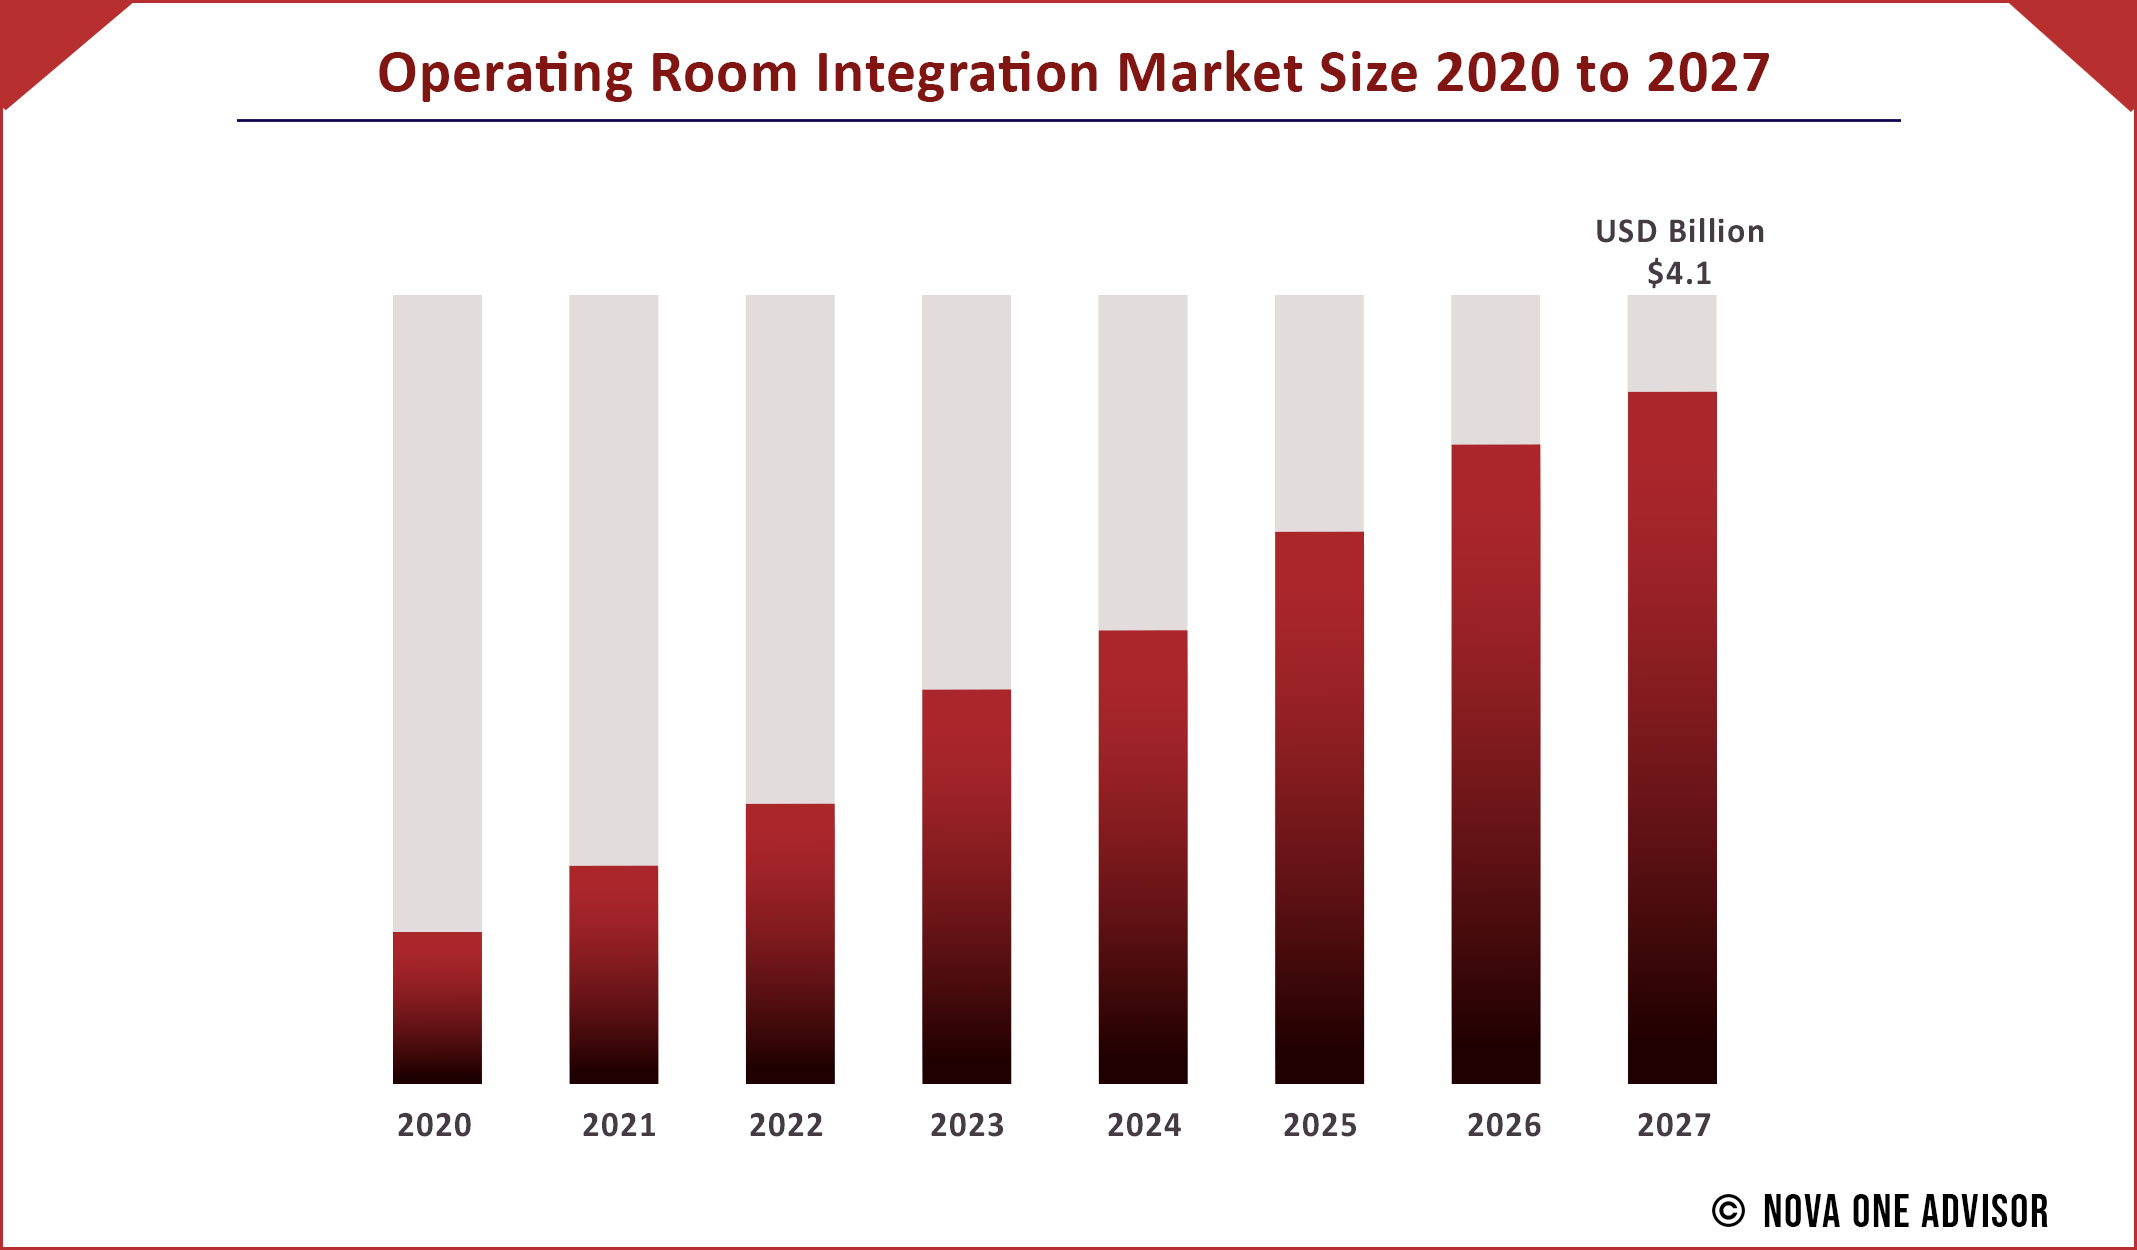 Operating Room Integration Market Size 2020 to 2027